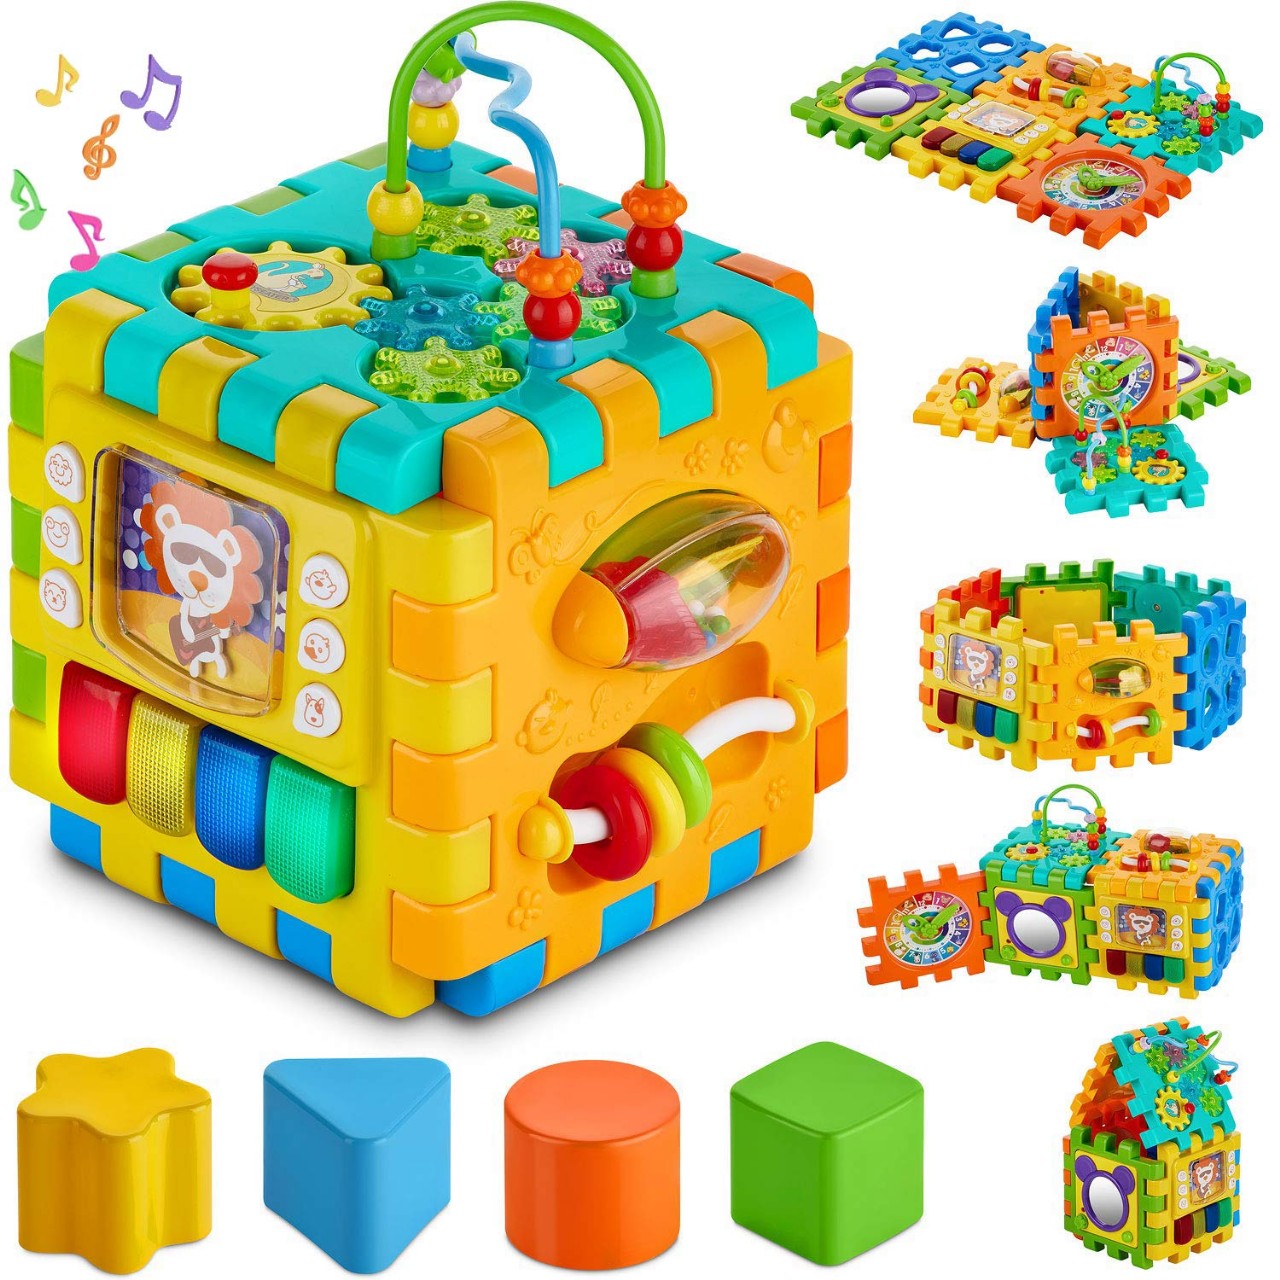 Baby Activity Cube Toddler Toys - 6 in 1 Shape Sorter Toys Baby Activity Play Centers for Kids Infan